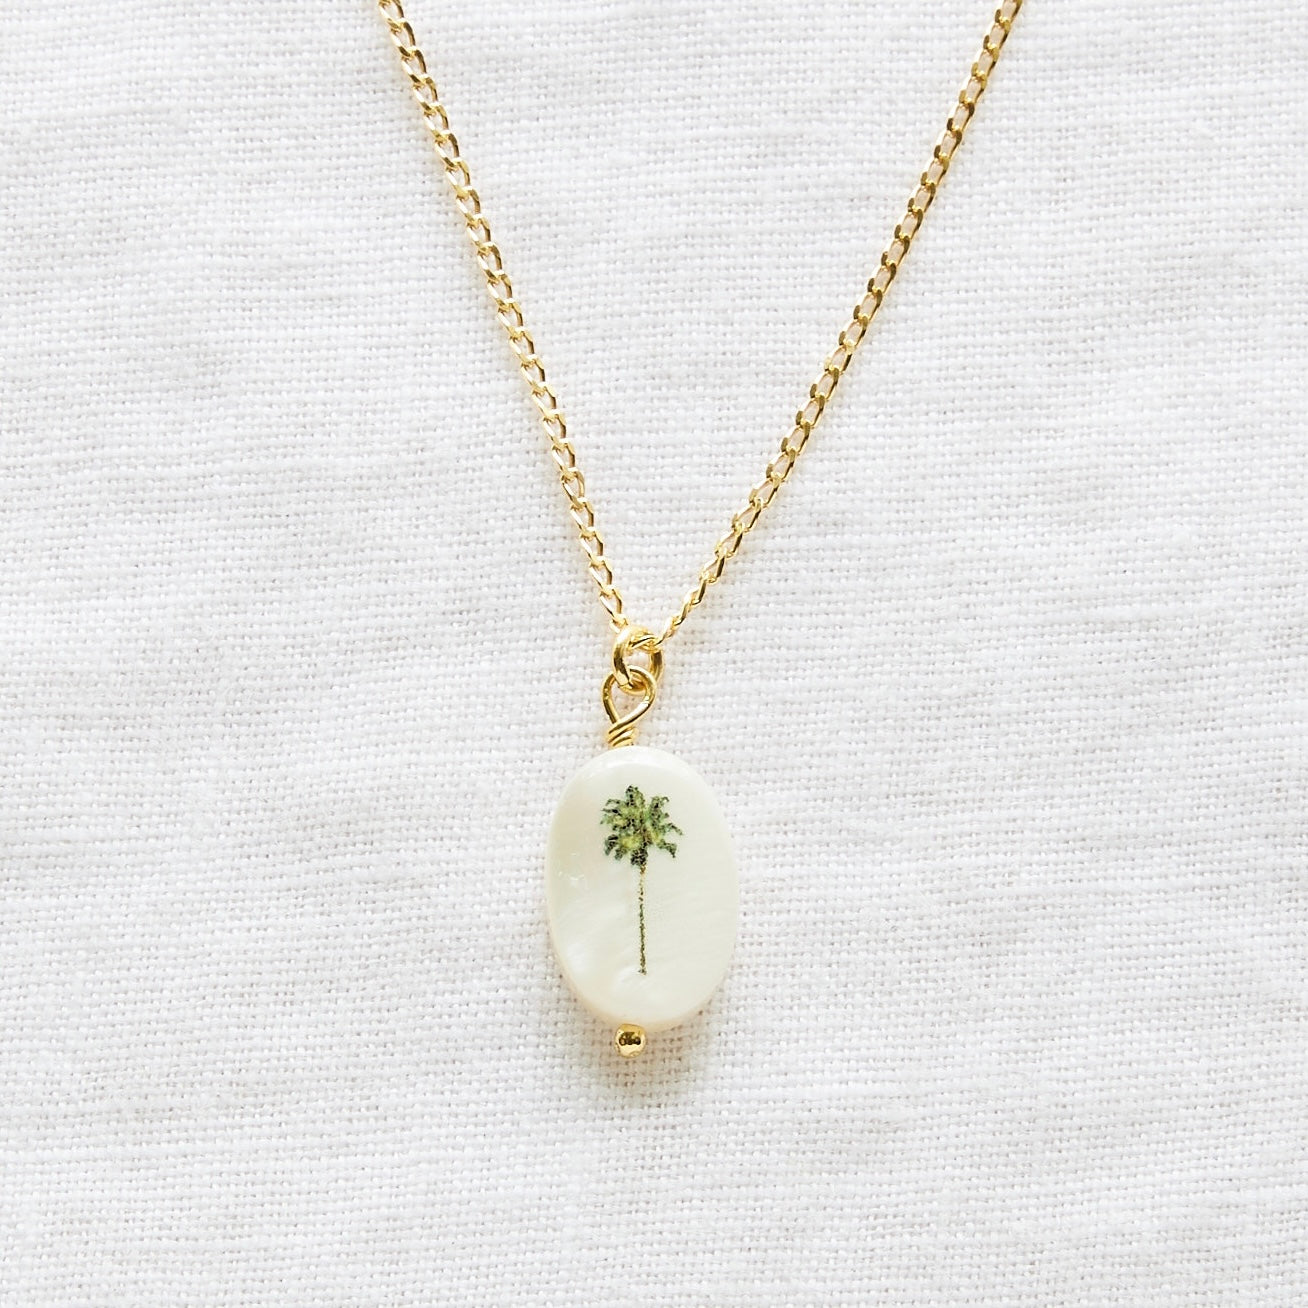 Palm Tree necklace on 24k Gold Plated chain